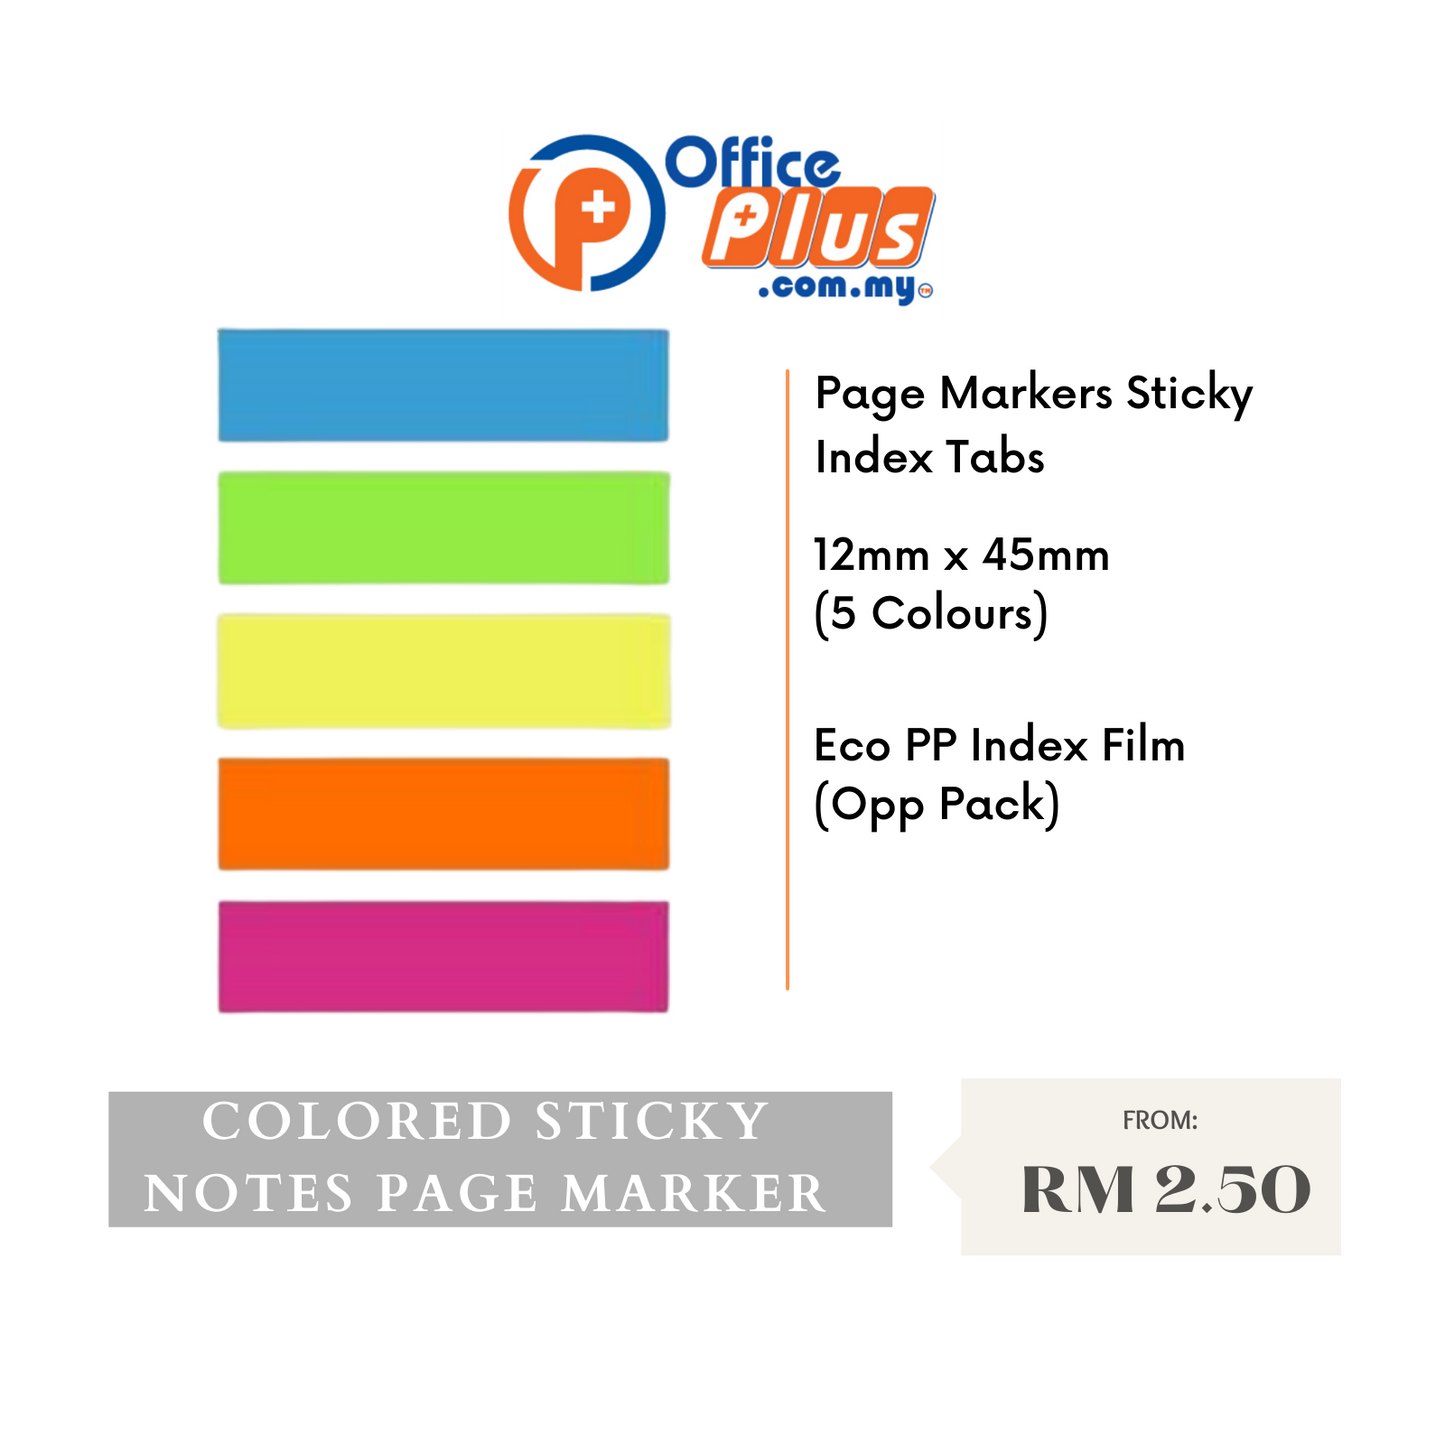 Colored Sticky Notes Page Marker - OfficePlus